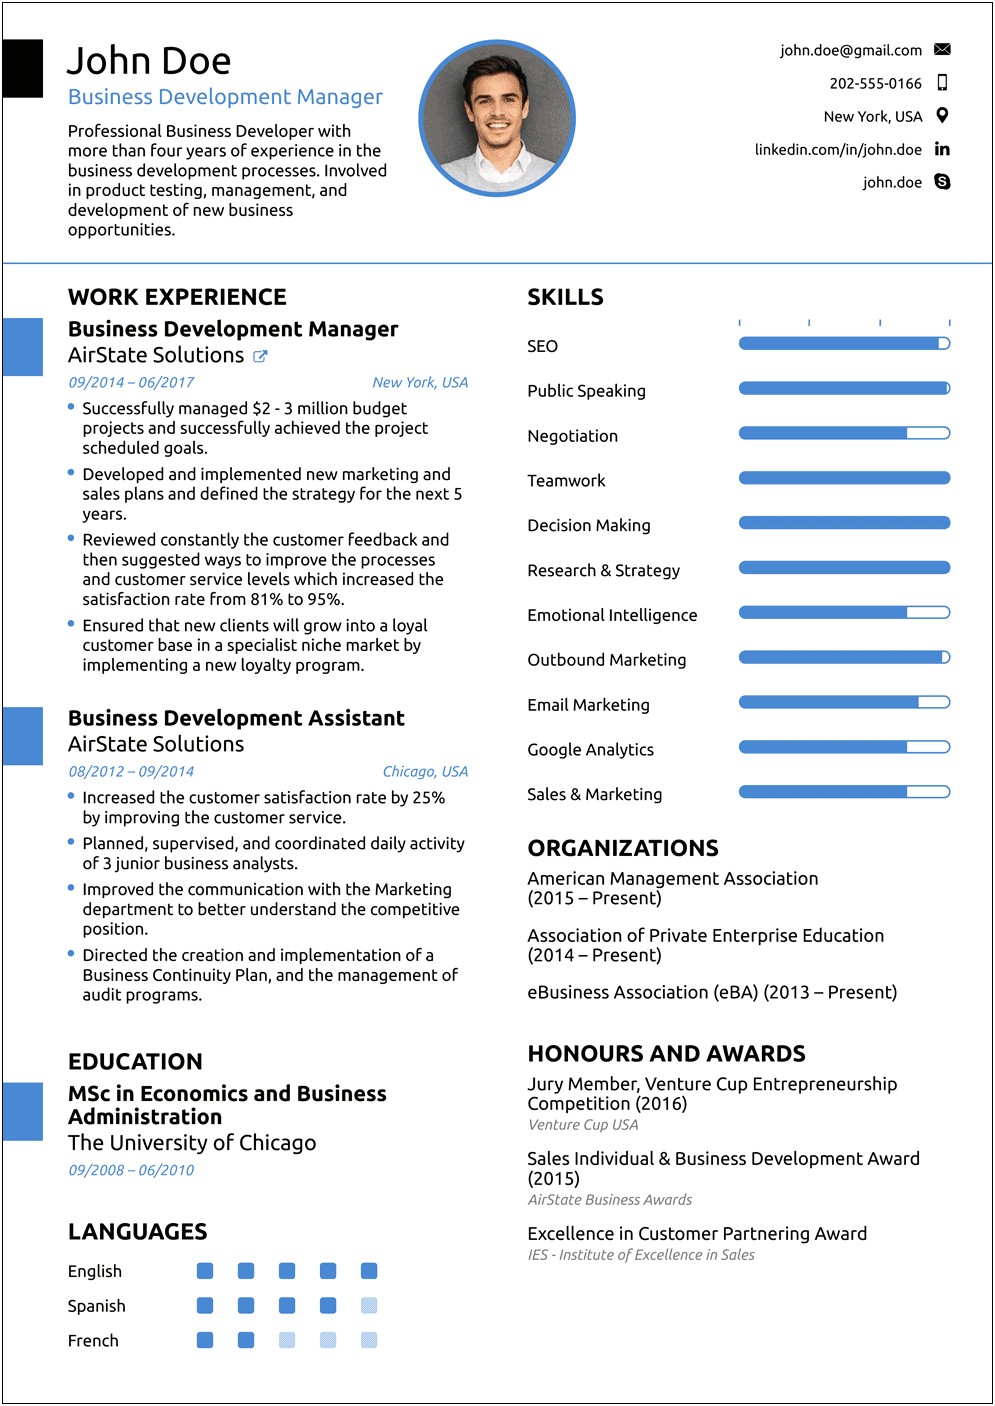 Sample Resume For Sales And Customer Service